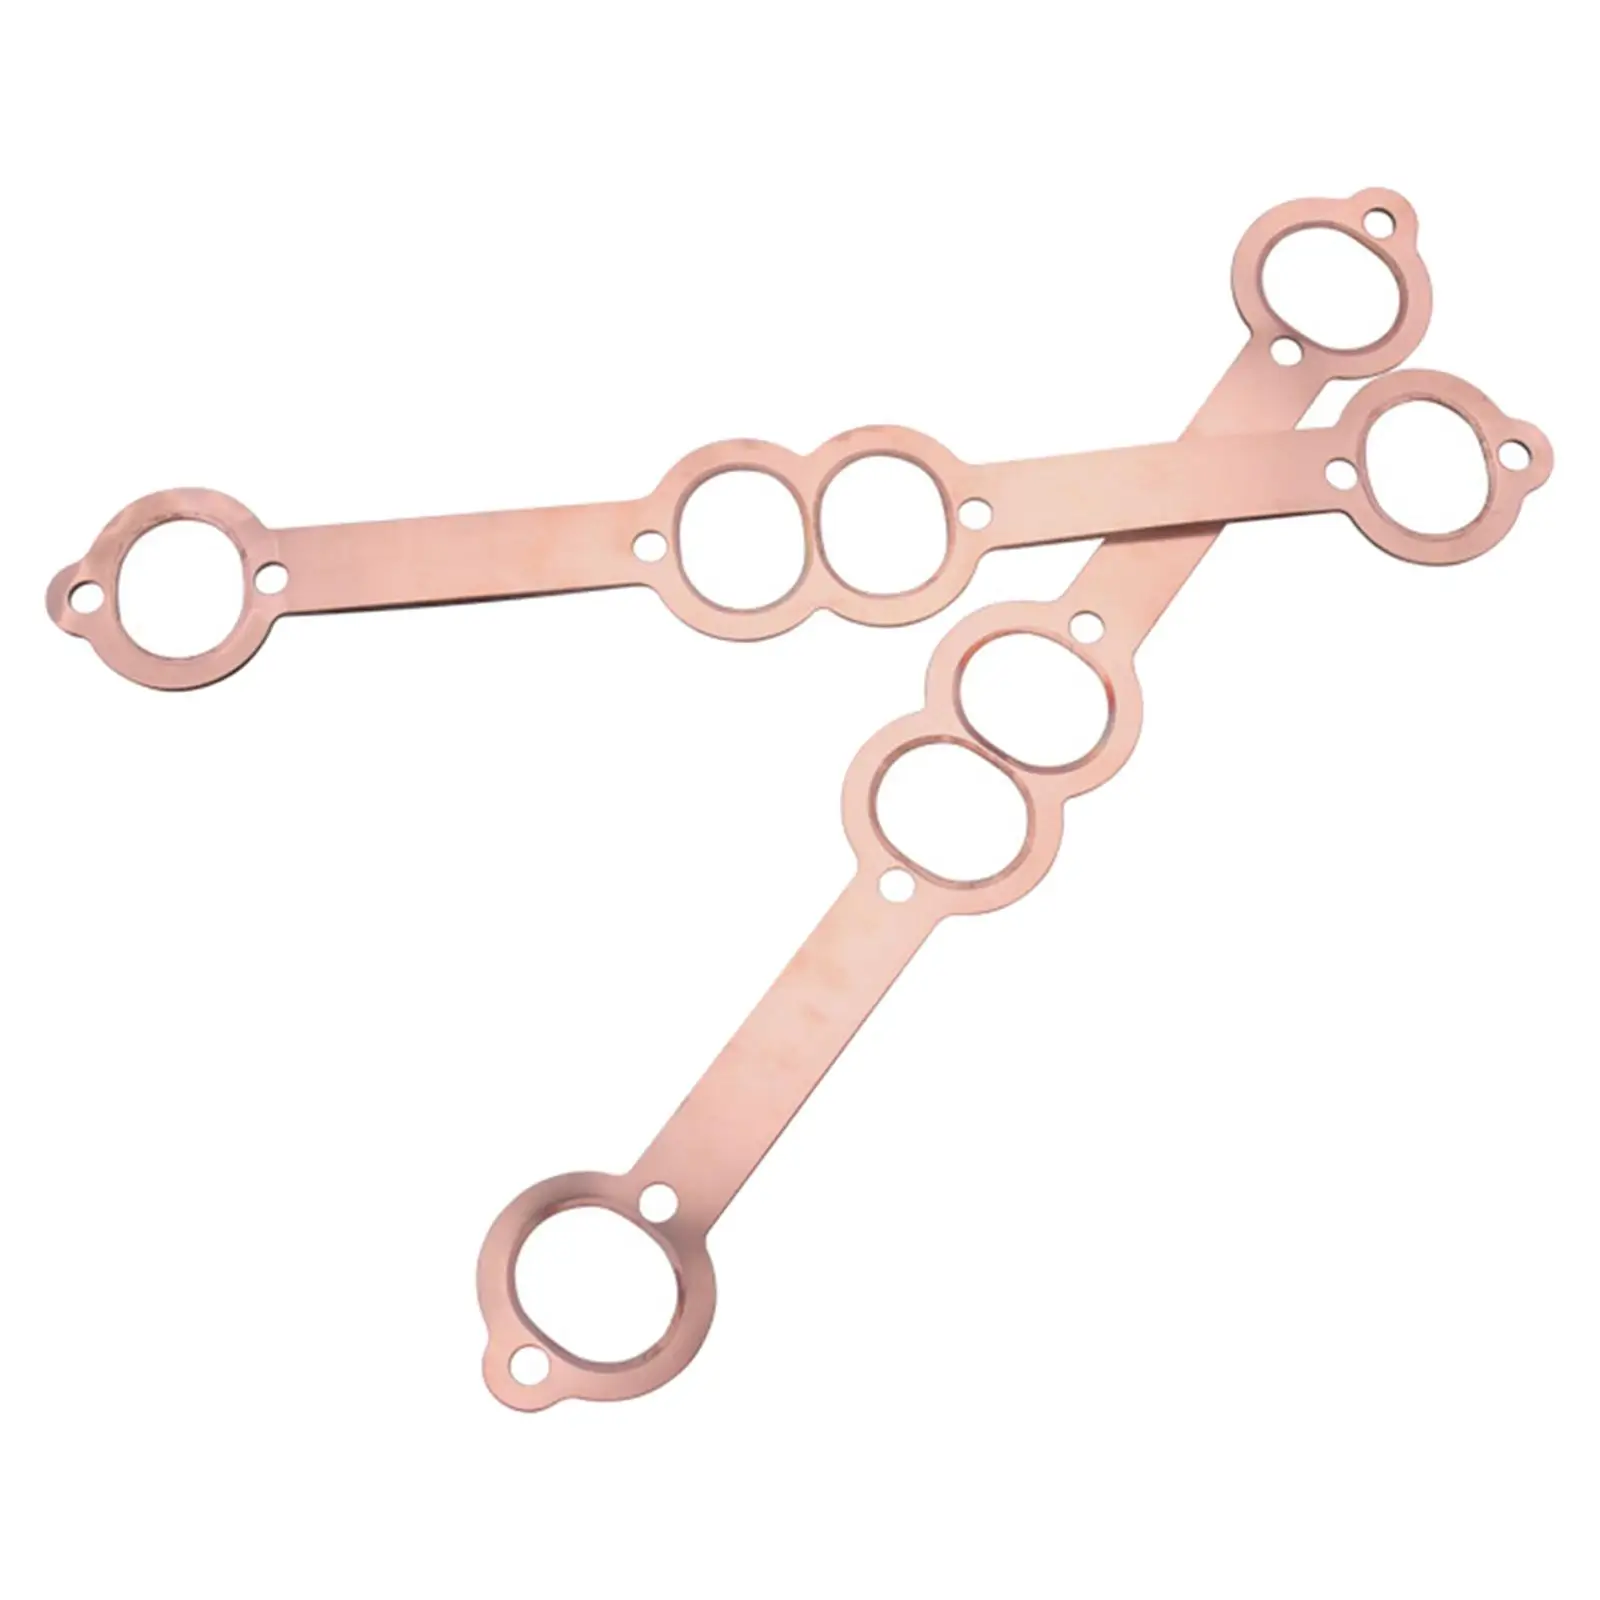 2 Pieces Vehicle Copper Header Exhaust Gaskets Reusable Oval Port, 1.8